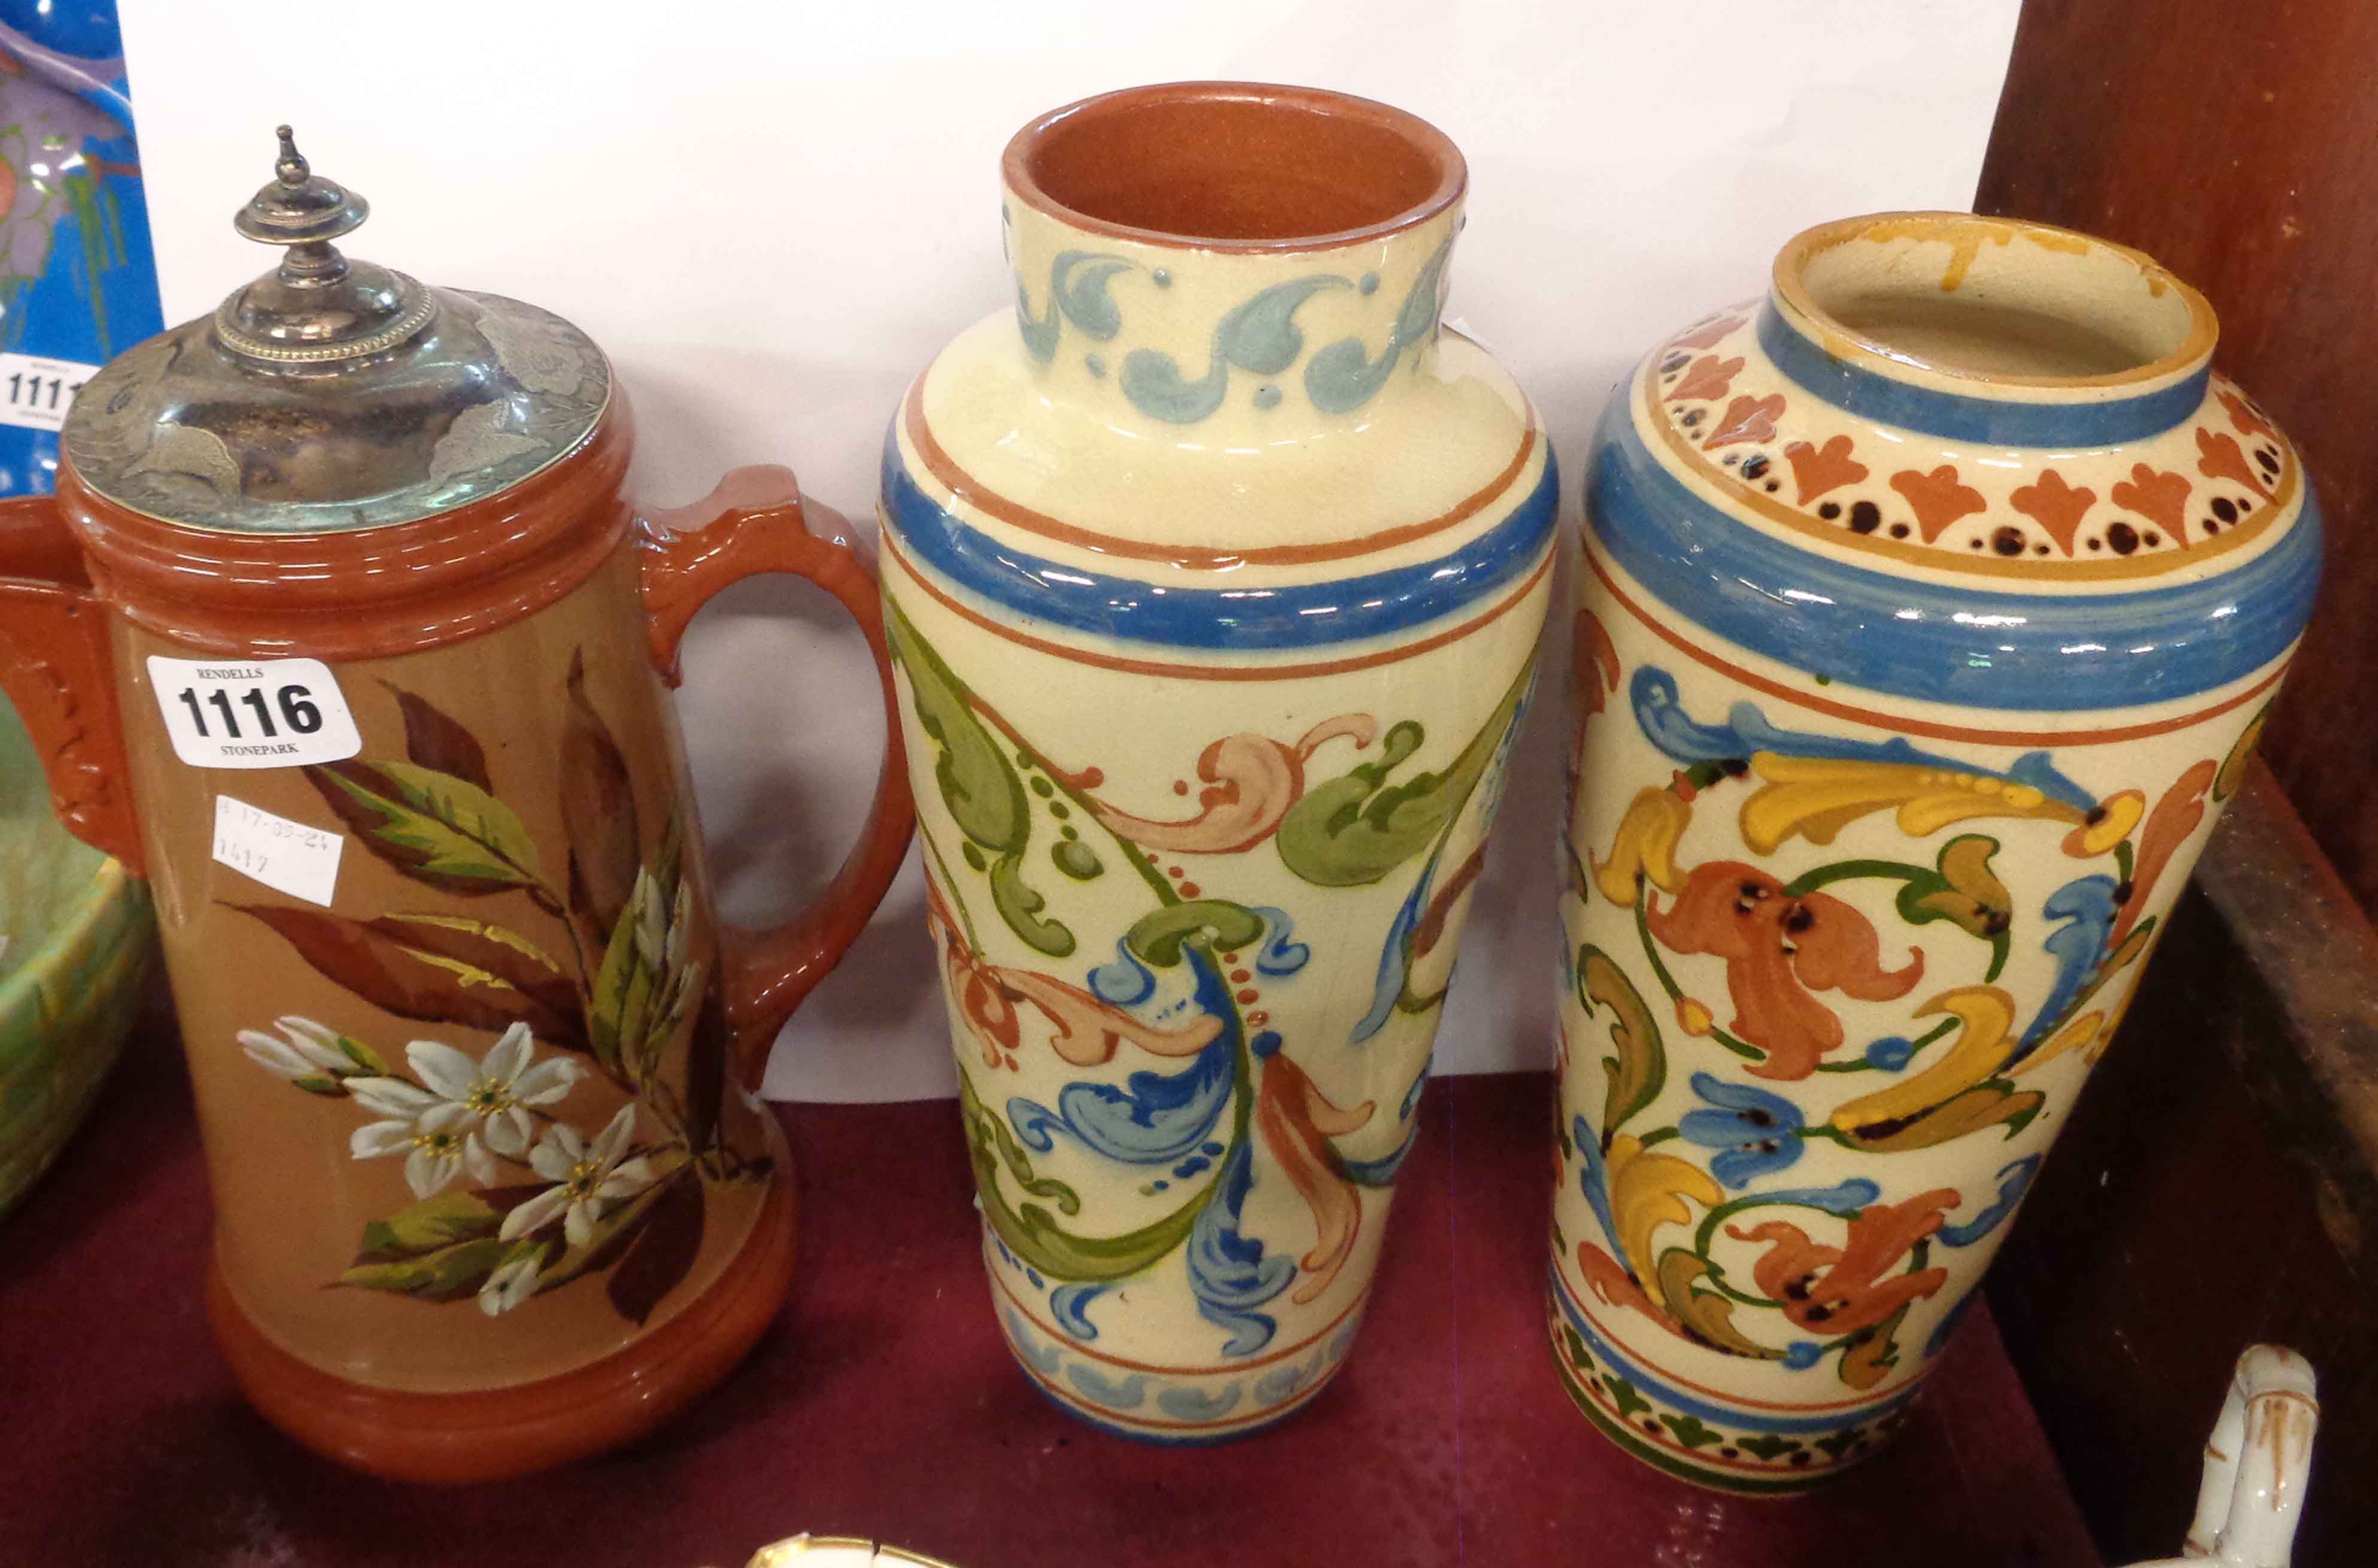 Two Torquay Pottery vases with 'Scandy' style decoration - sold with a Watcombe jug with Apple